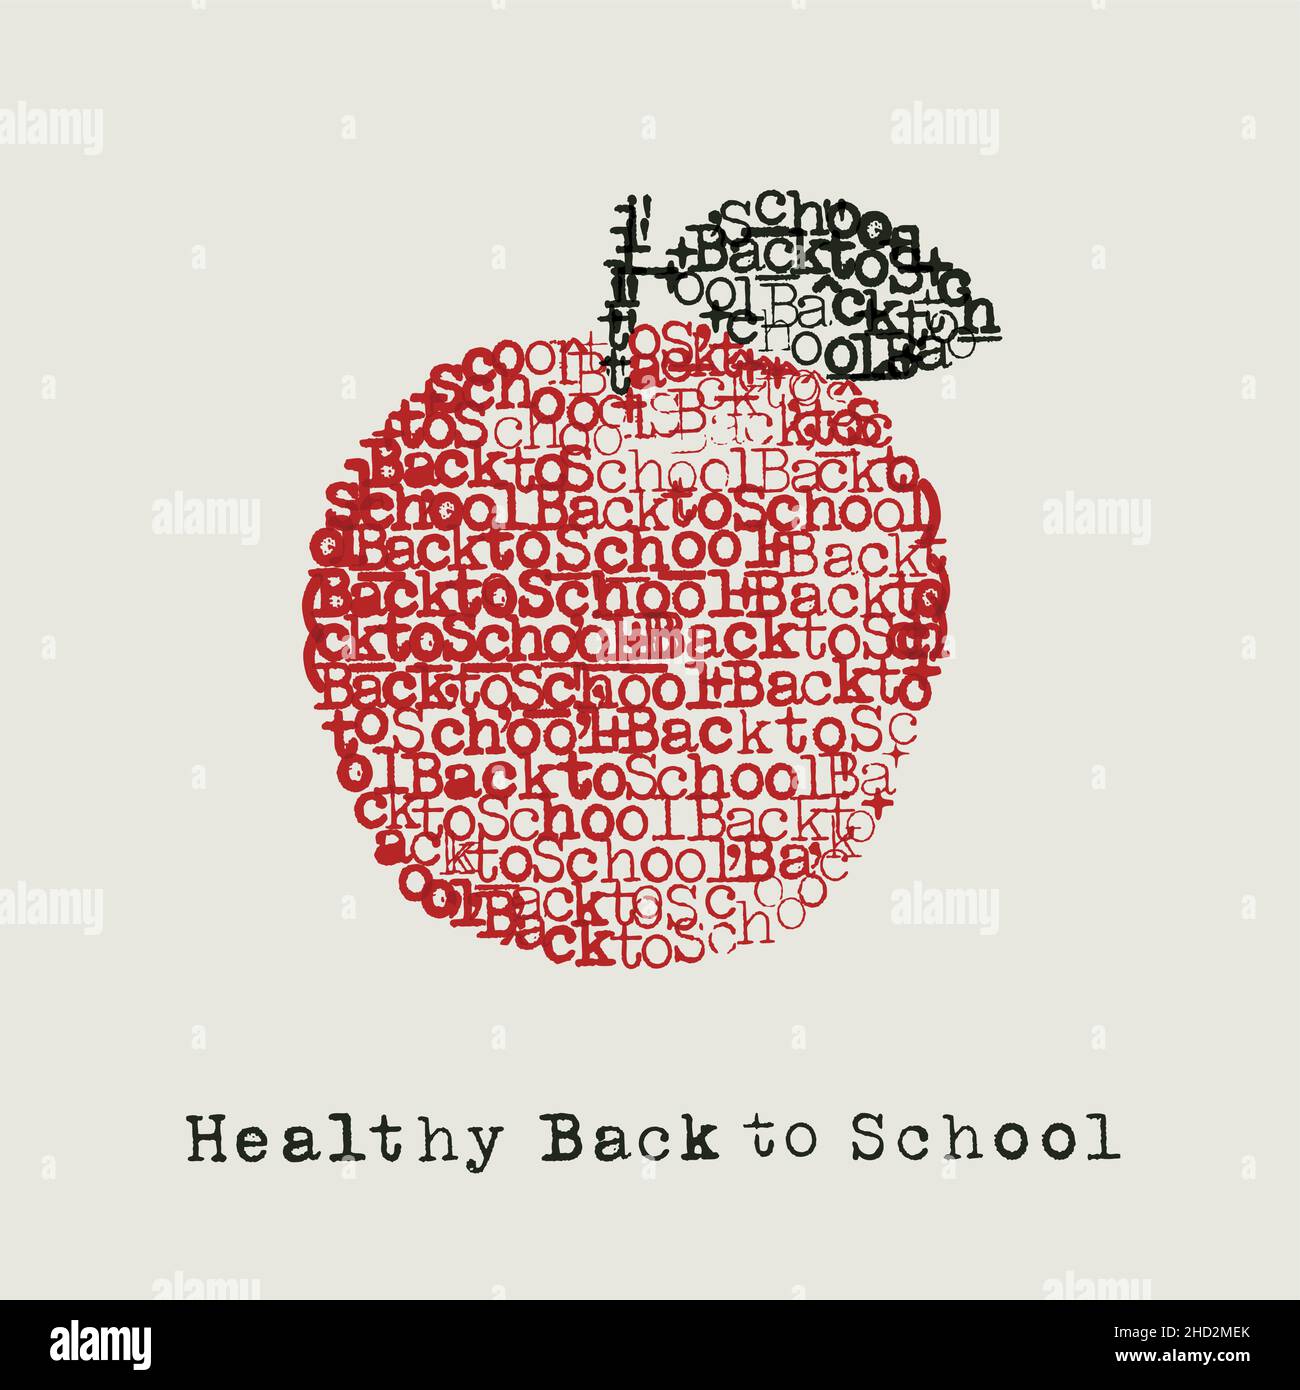 healthy back to school in typewriter art vector illustration on white background Stock Vector